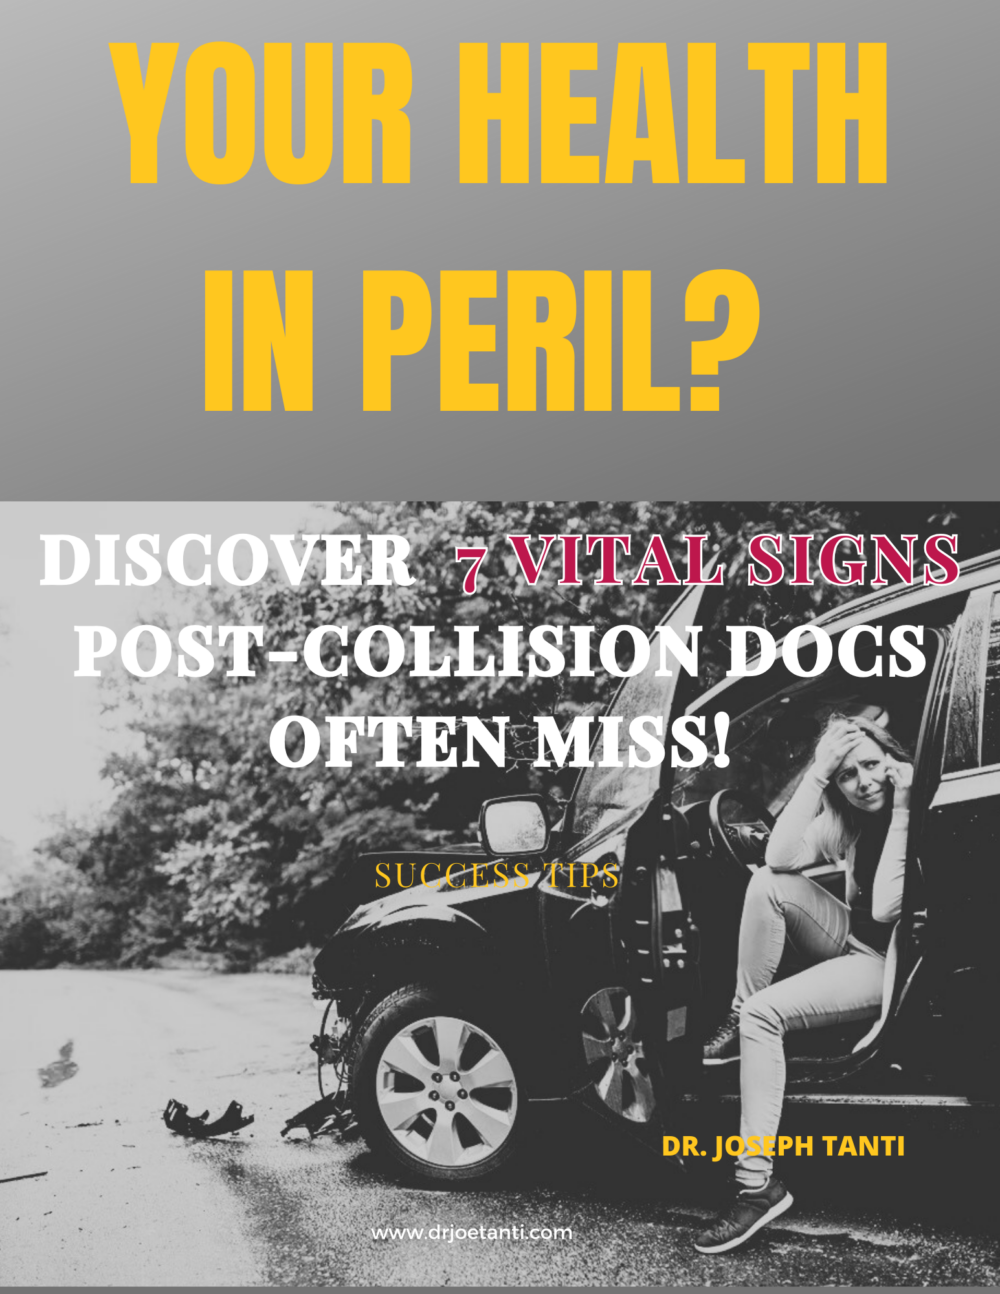 Report titled: Your health in peril? Discover the 7 Vital Signs Post-Collision Docs Often Miss!